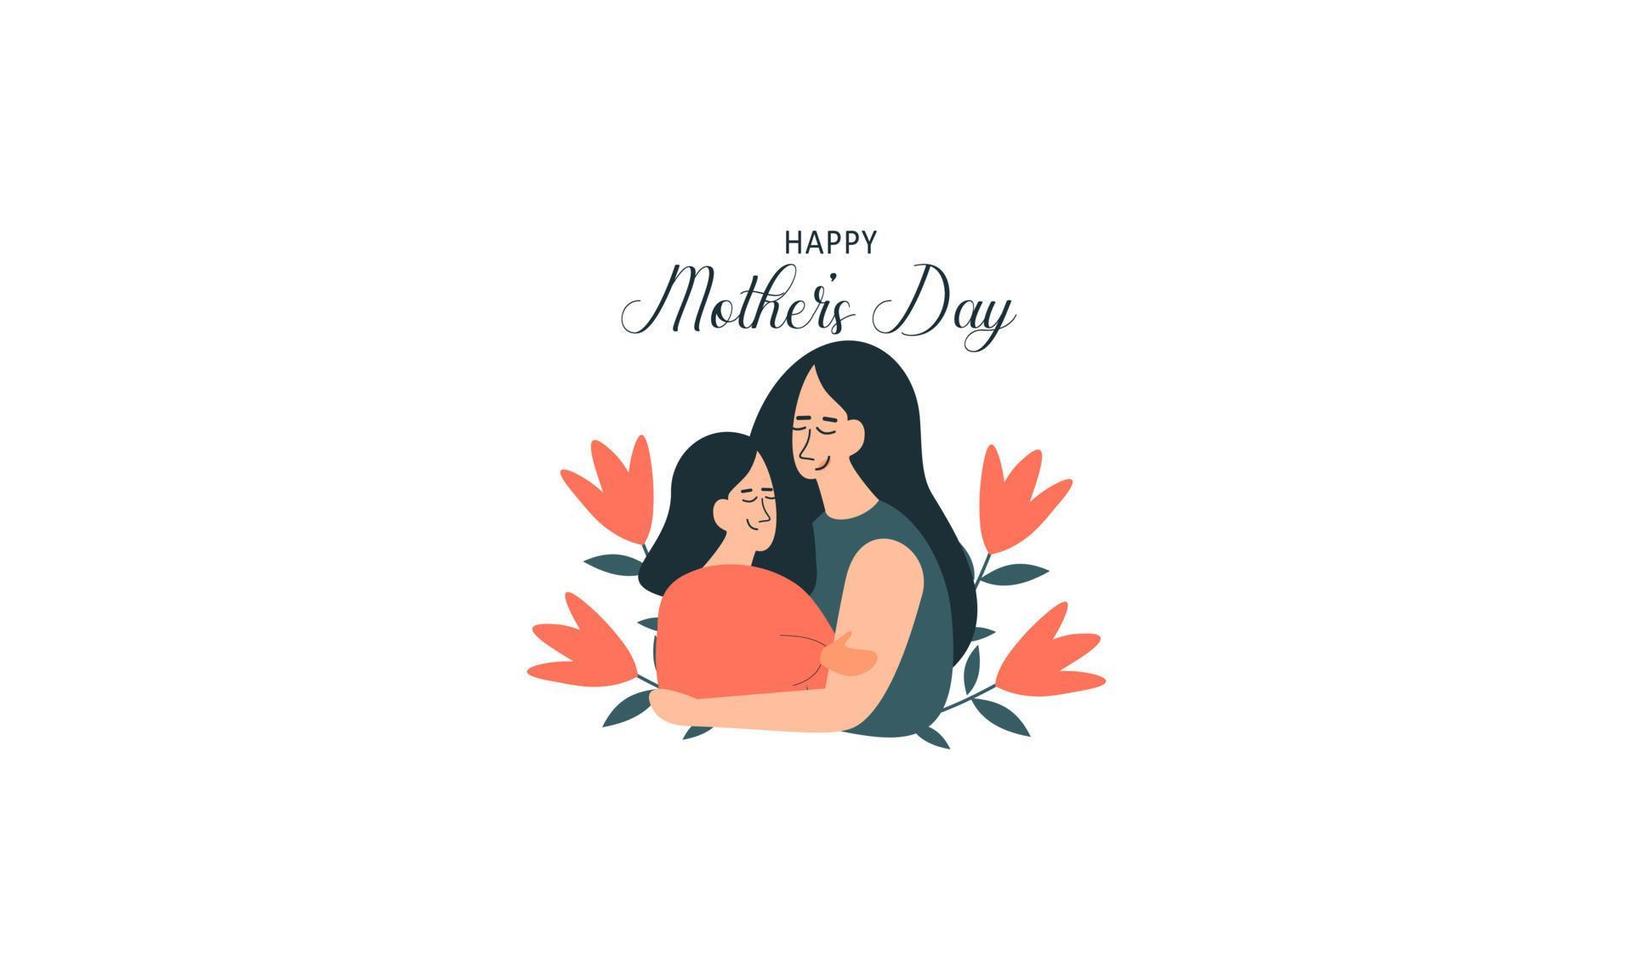 Mother's day concept illustration vector